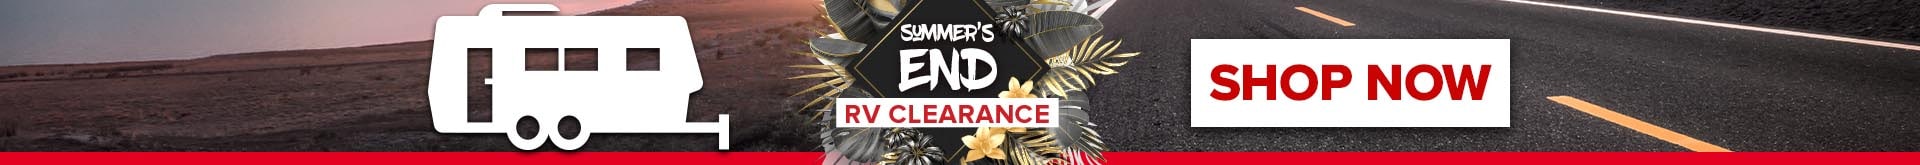 Summer's End RV Clearance